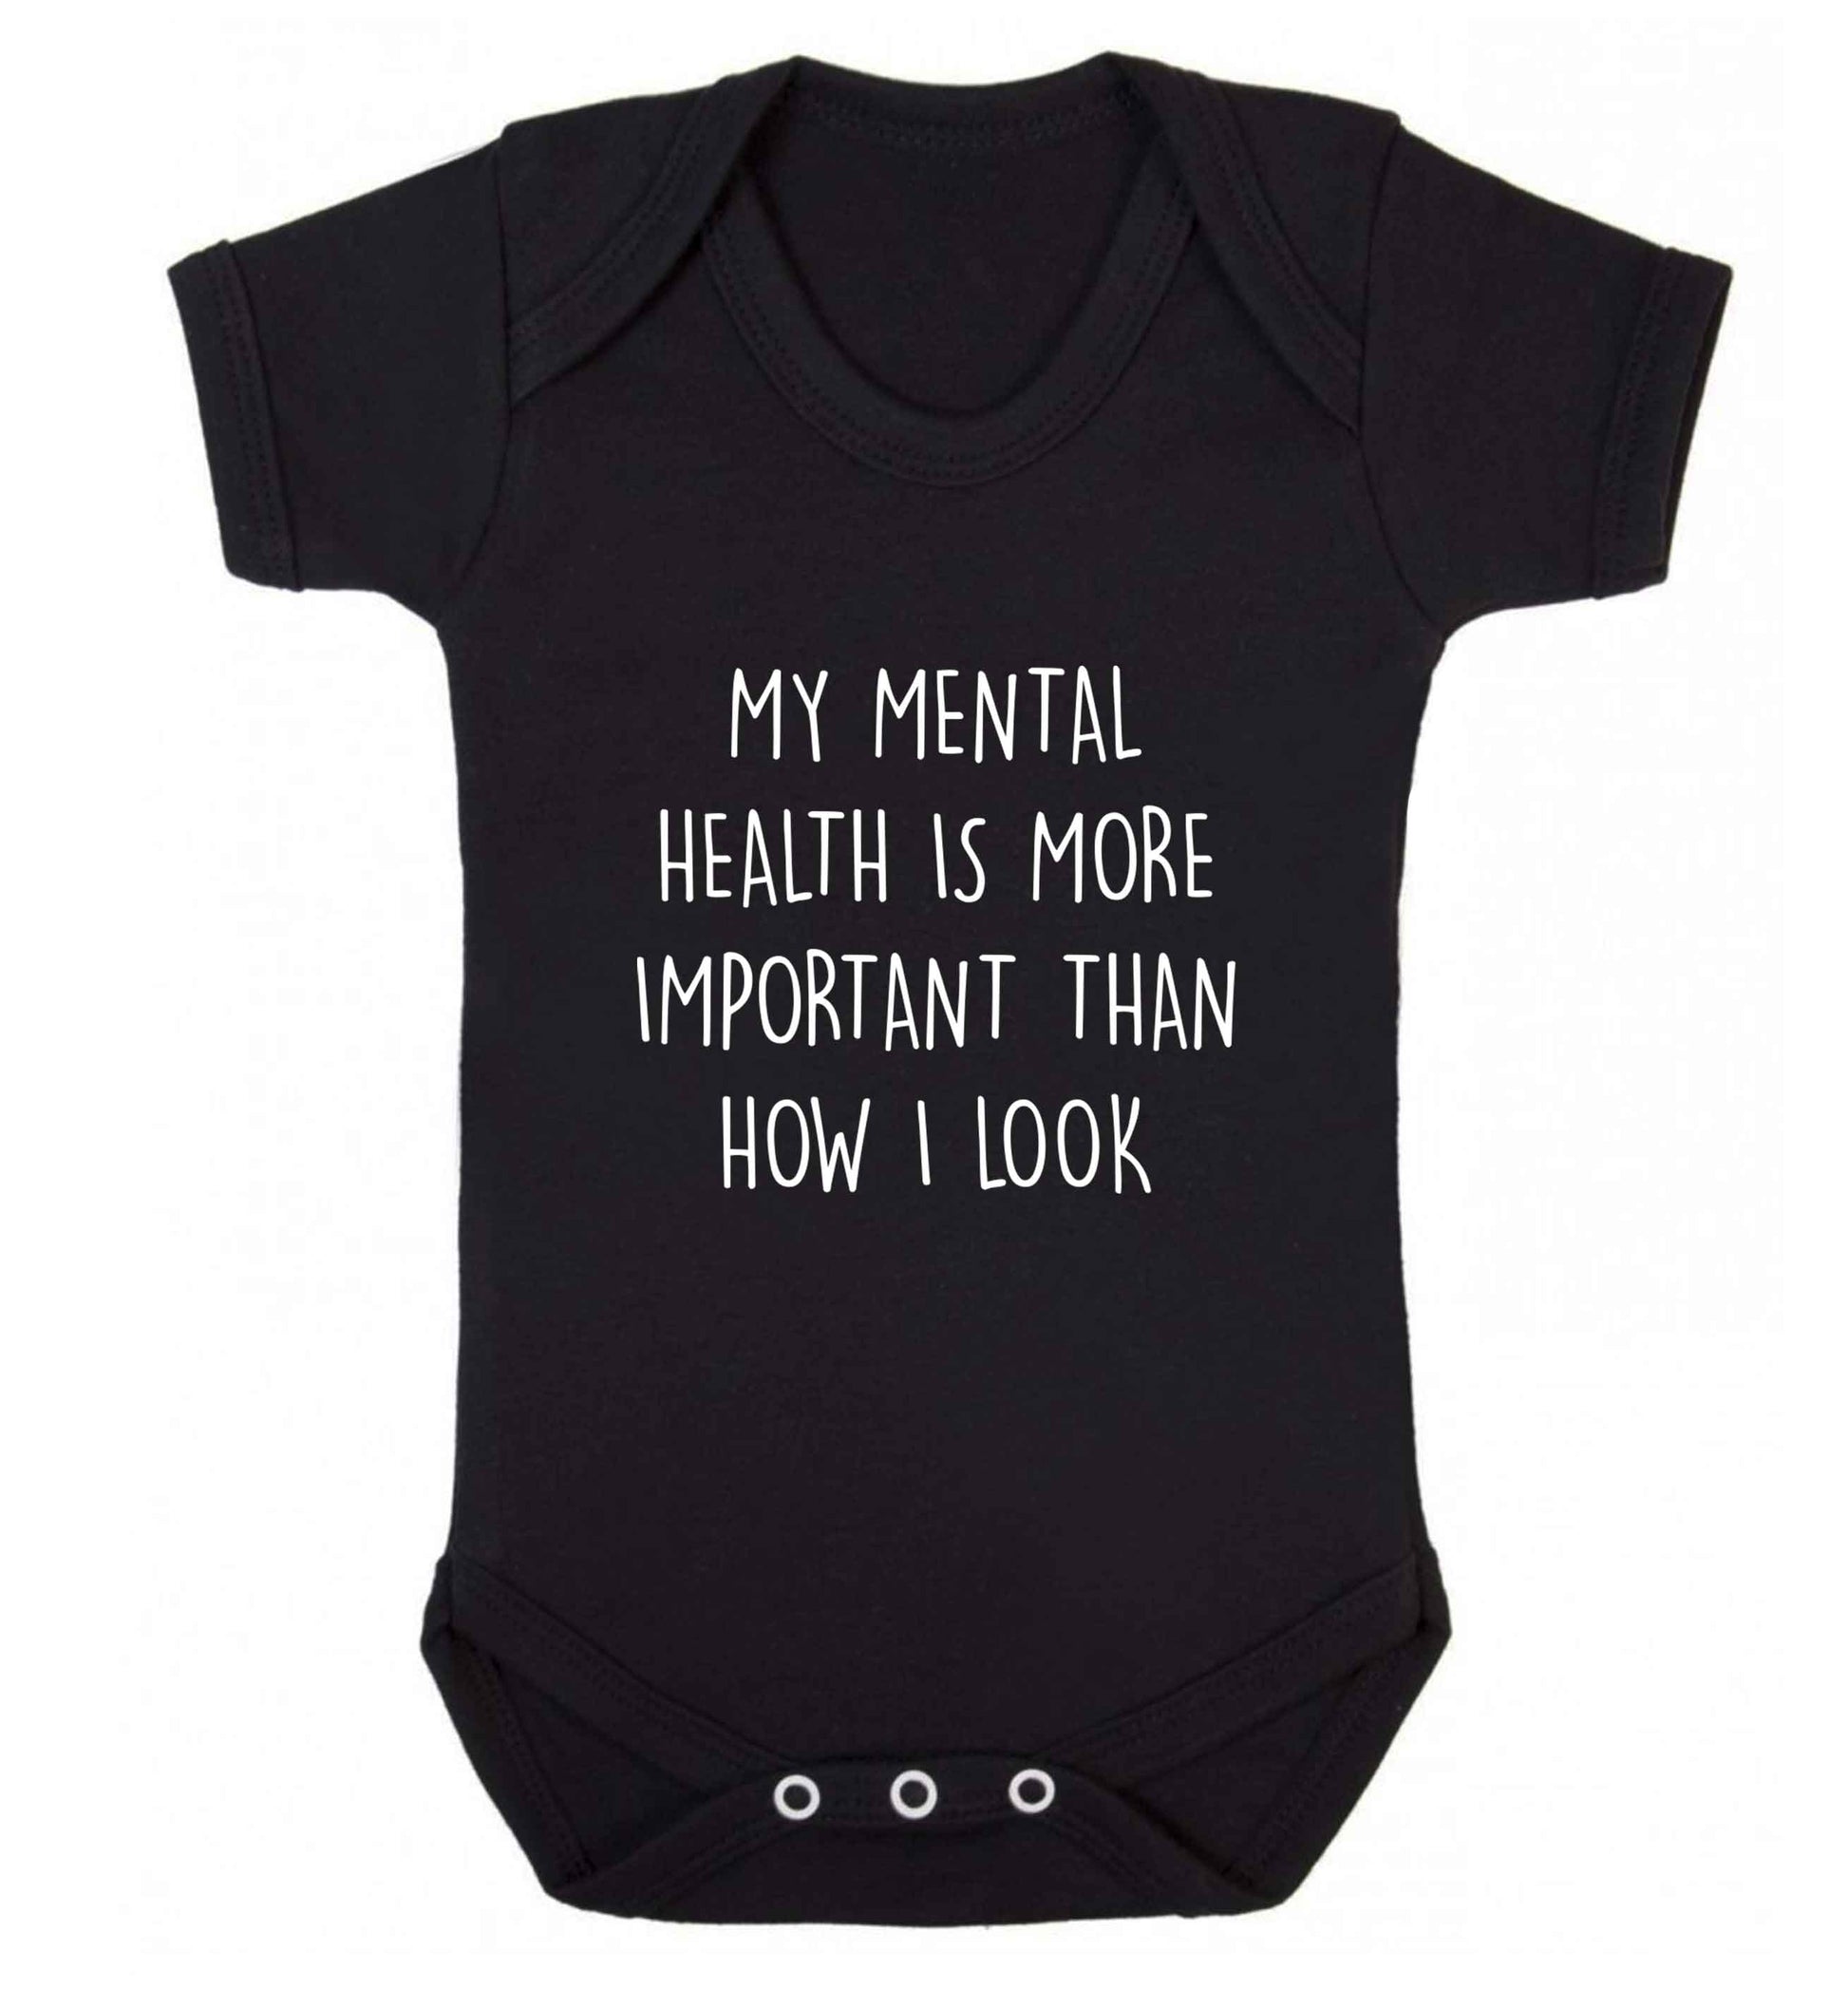 My mental health is more importnat than how I look baby vest black 18-24 months